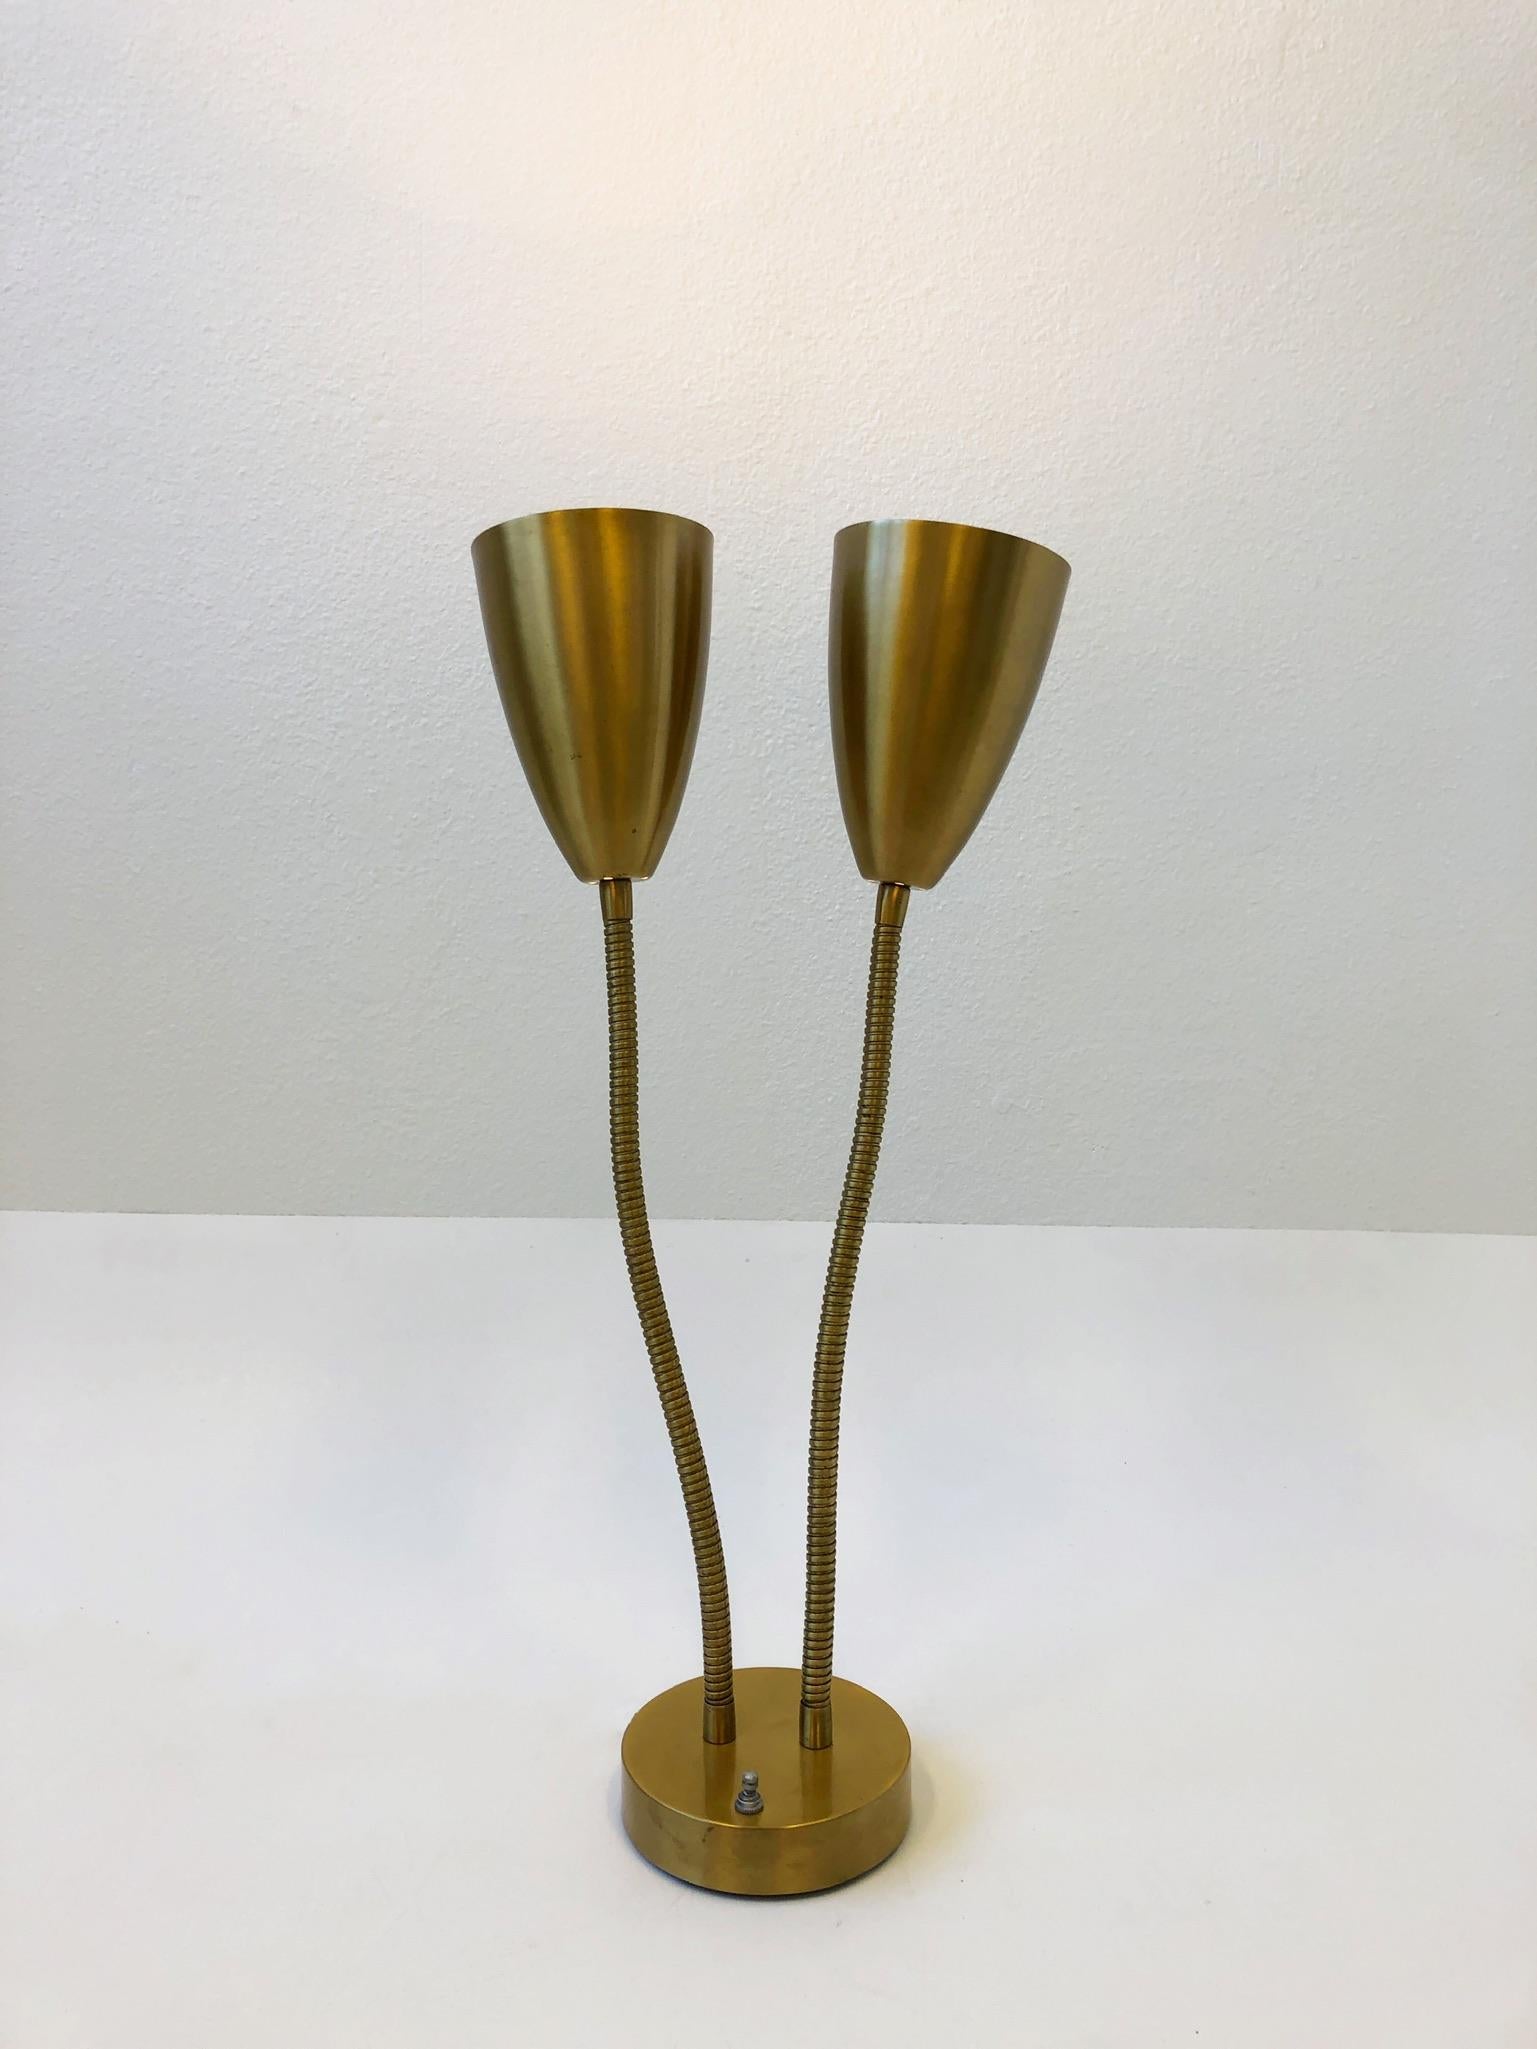 1950s double cone satin brass gooseneck table lamp. The lamp has been newly rewired with a three way rotating switch. Each cone can be moved around easily. The lamp shows some age spots(see detail photos).
Measurements: 14” wide 6” deep and 27”